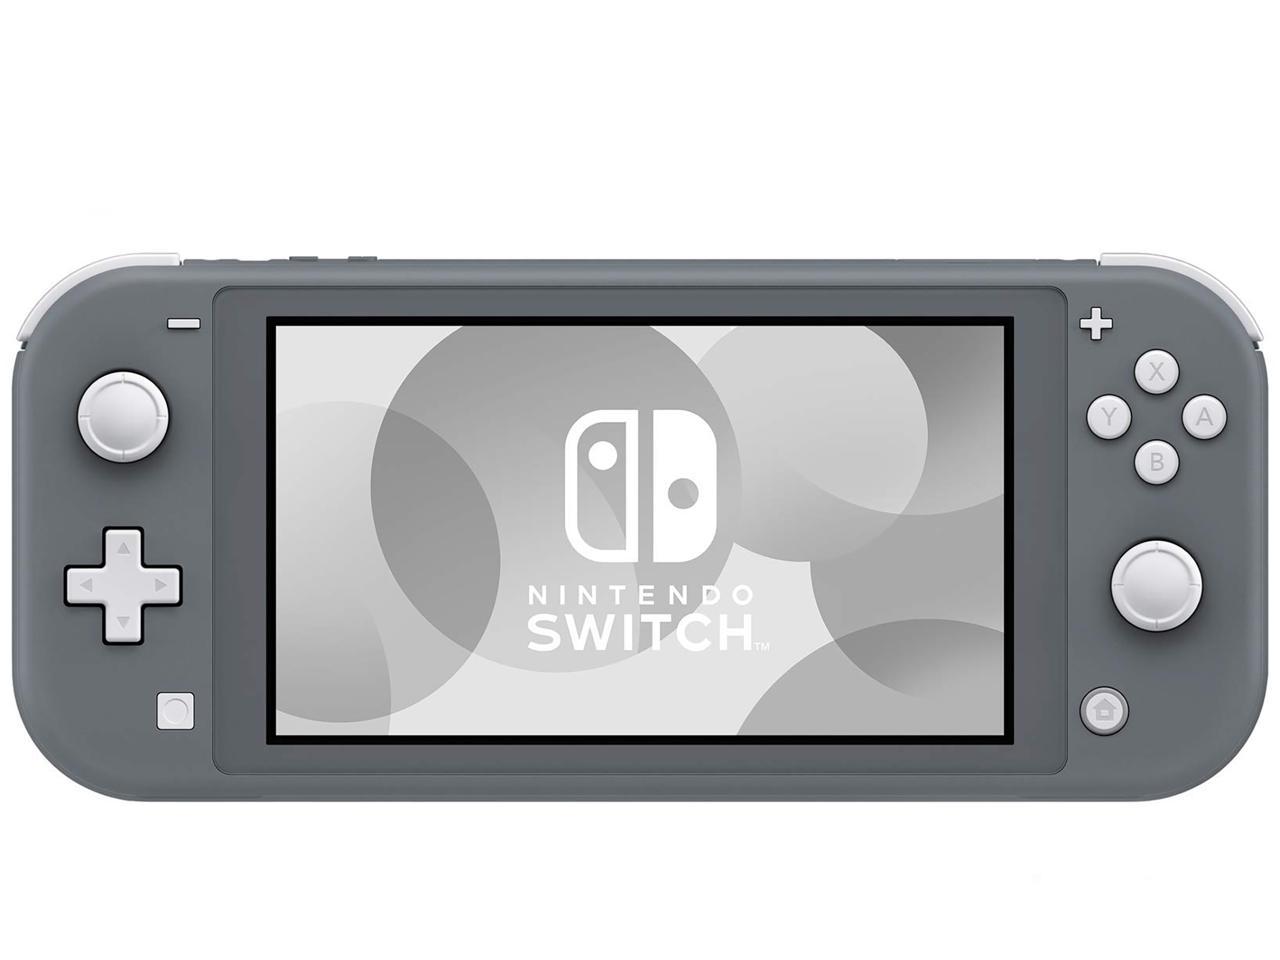 Nintendo Switch Lite with 6Ave Cloth and The Legend of Zelda: Breath of the Wild